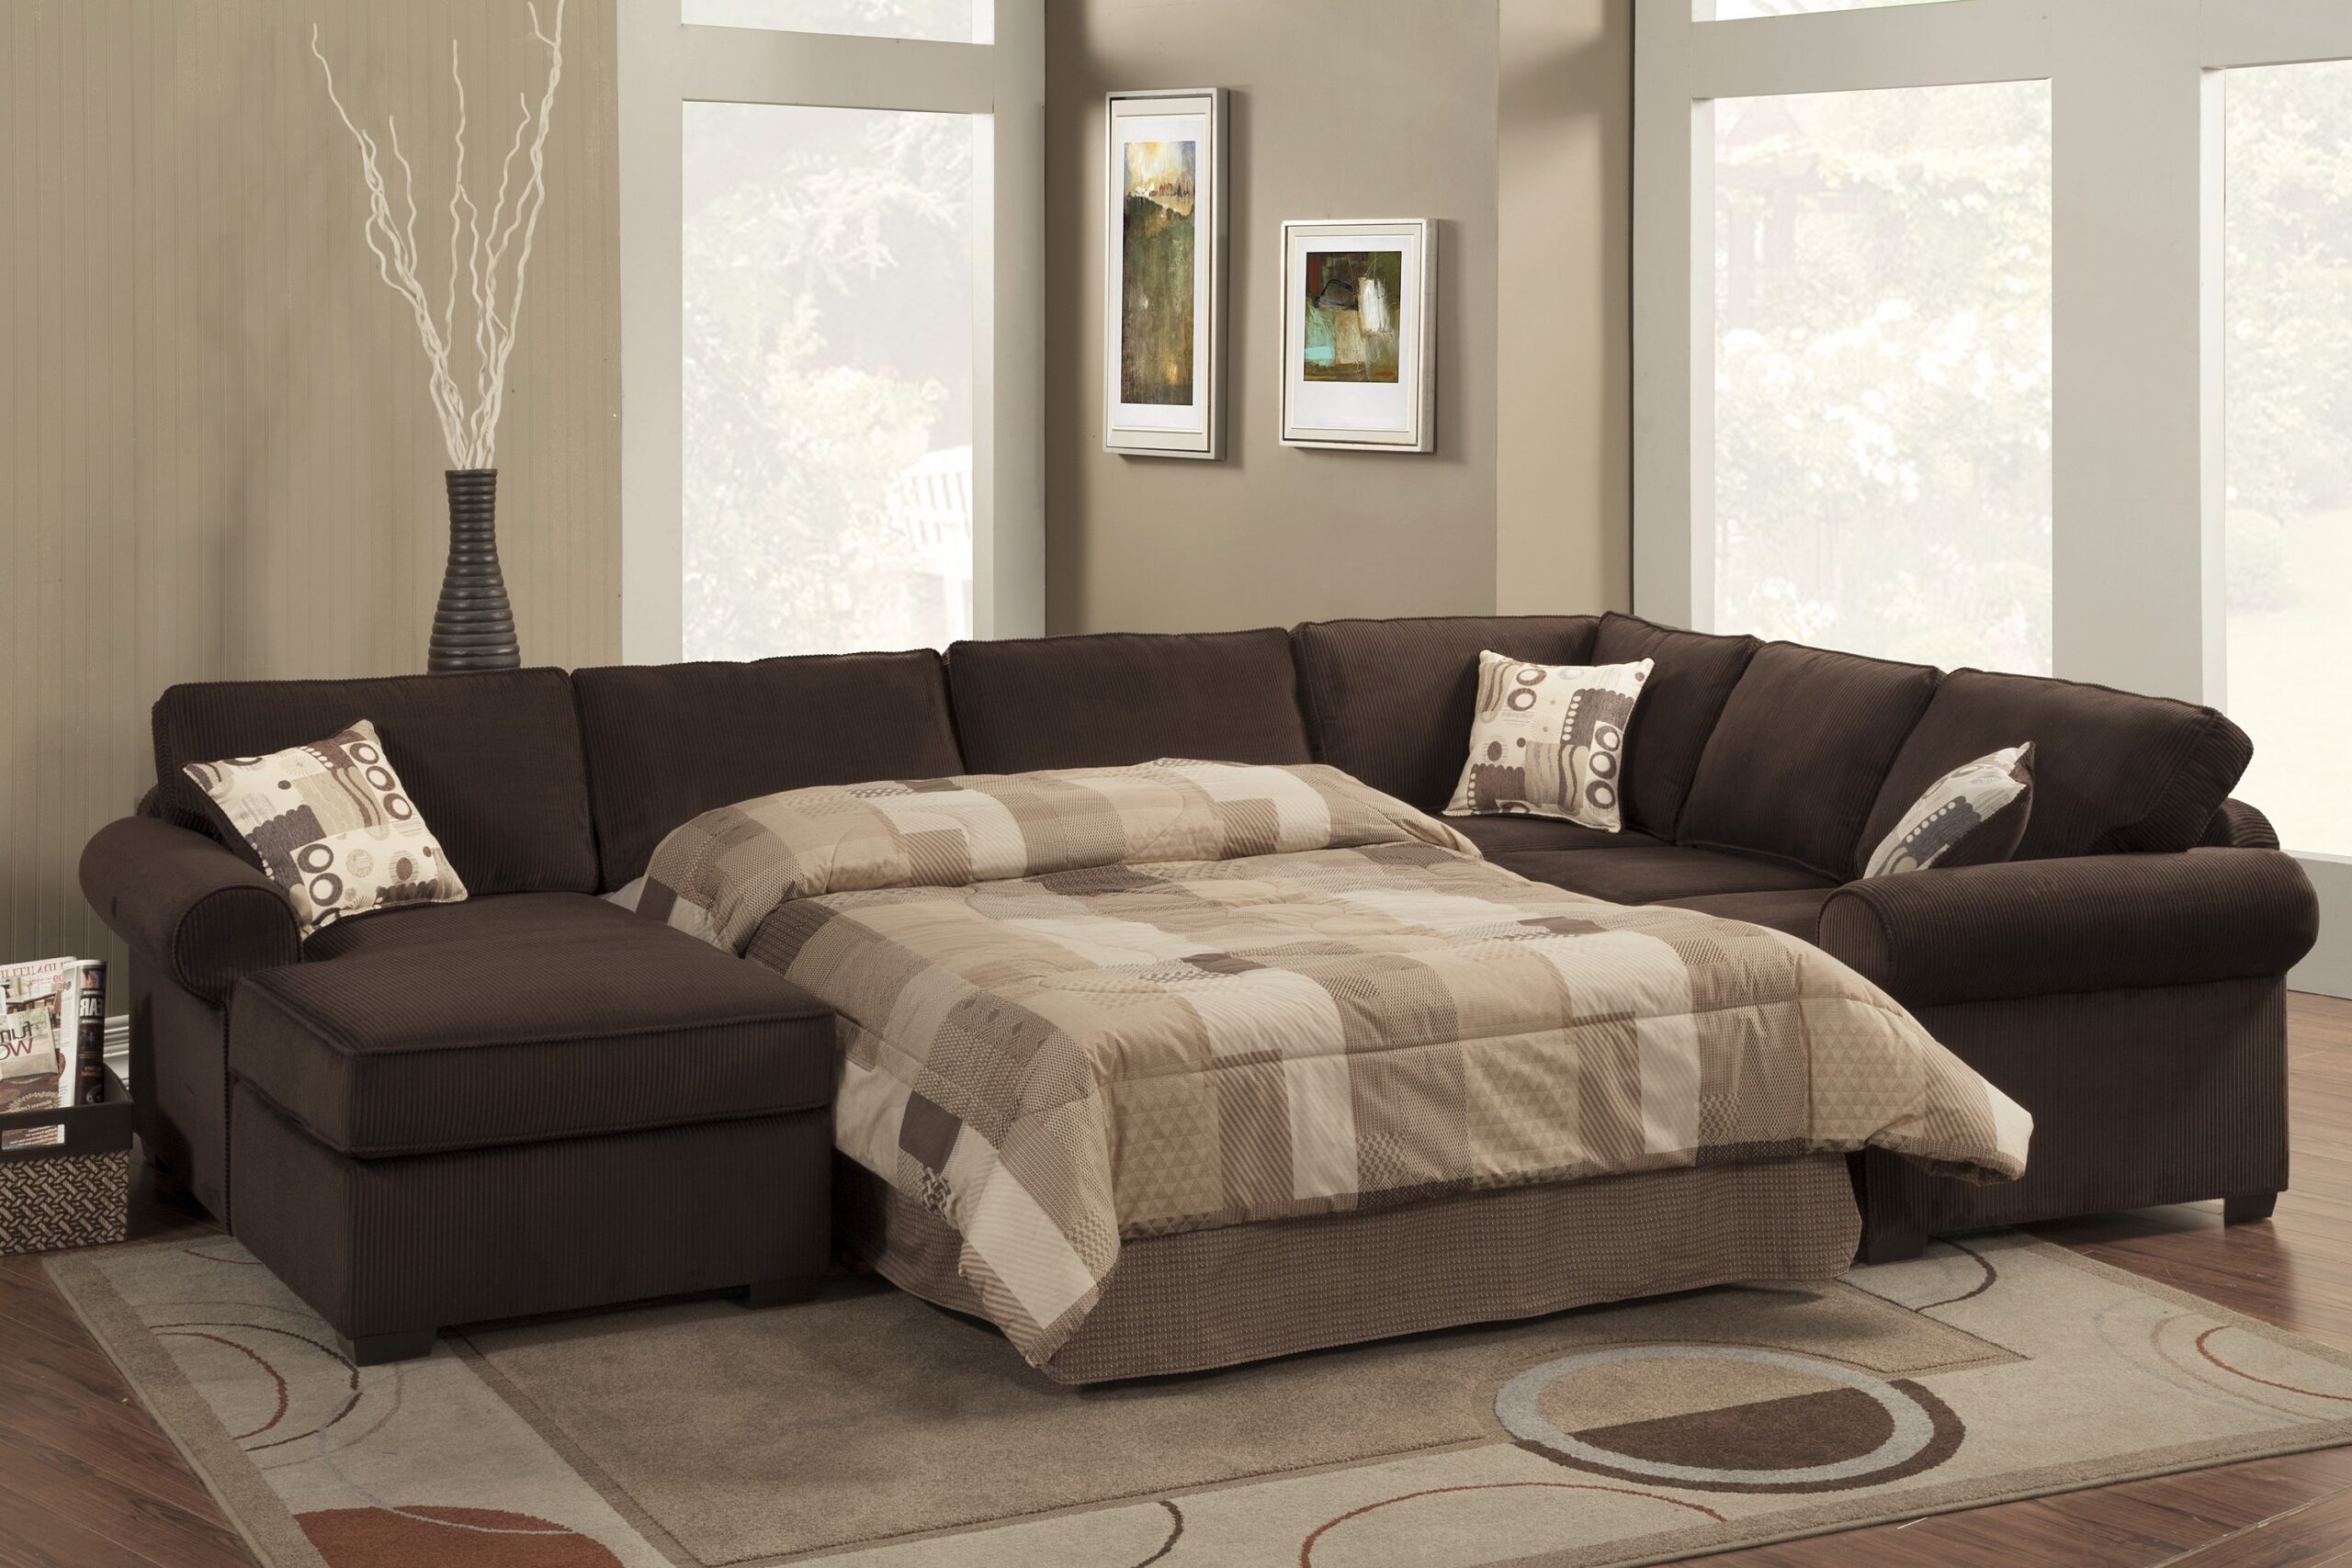 Top 20 Of Cozy Sectional Sofas Scaled 